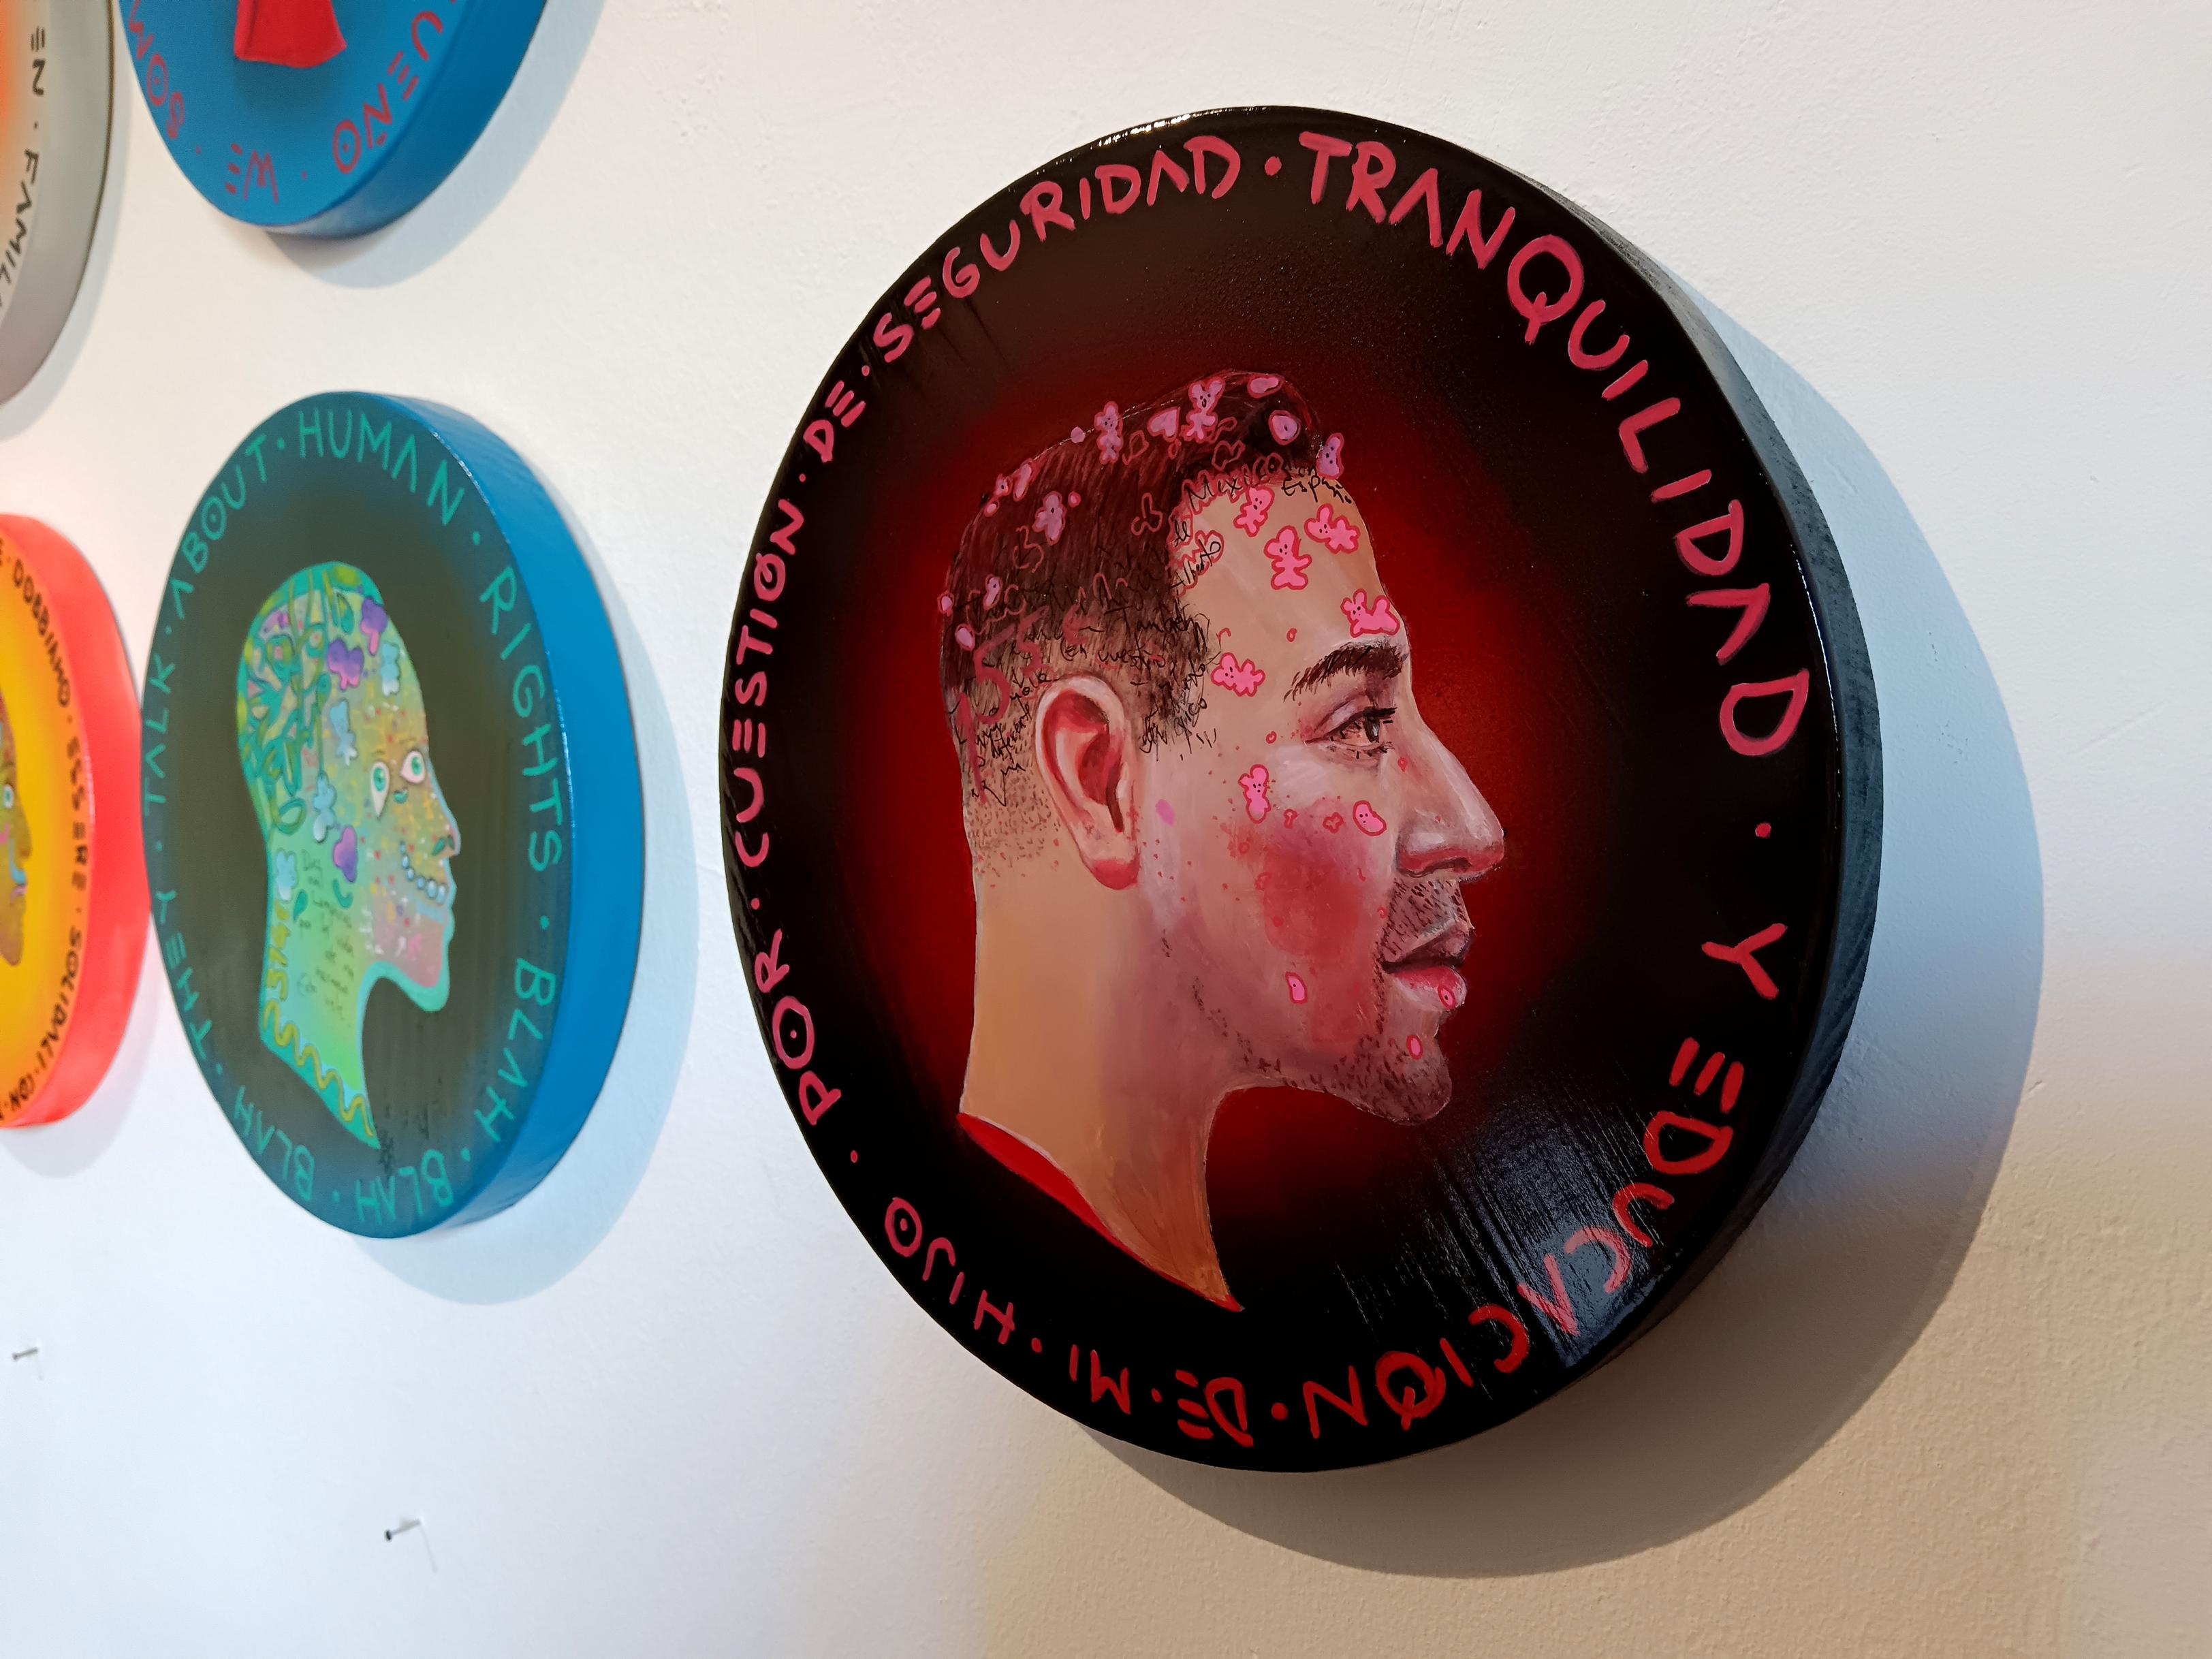 This artwork, crafted in acrylic and mixed media on wood in the shape of a coin face, belongs to Natasha Lelenco's 